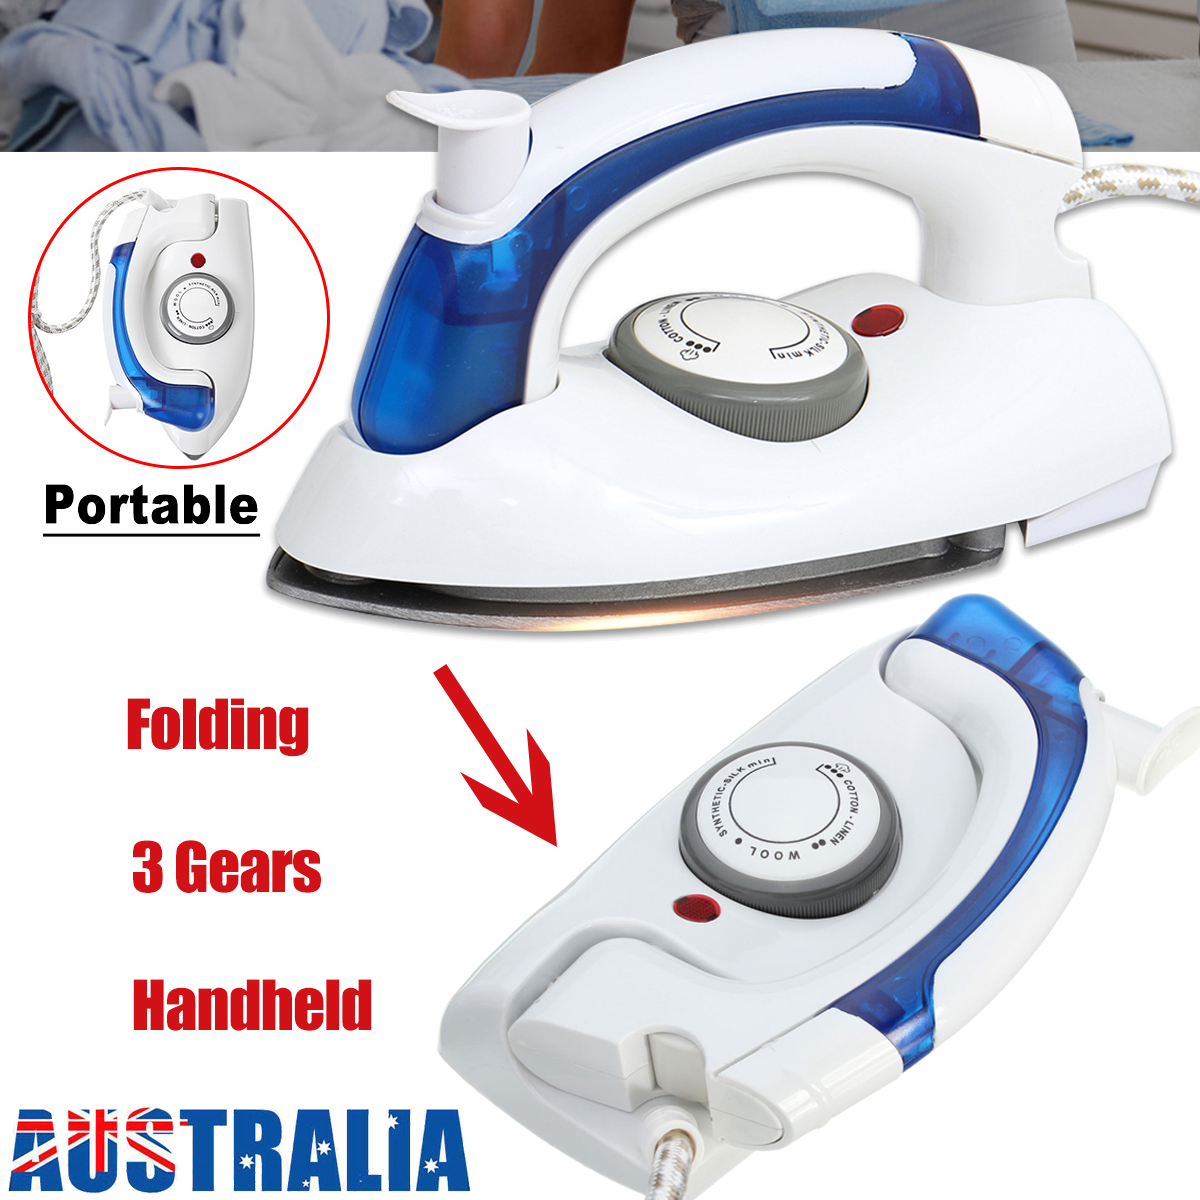 700W-Portable-Handheld-Foldable-Electric-Steam-Iron-3-Gear-Fast-Heat-Up-Garment-Steamer-Wrinkle-Remo-1754049-4